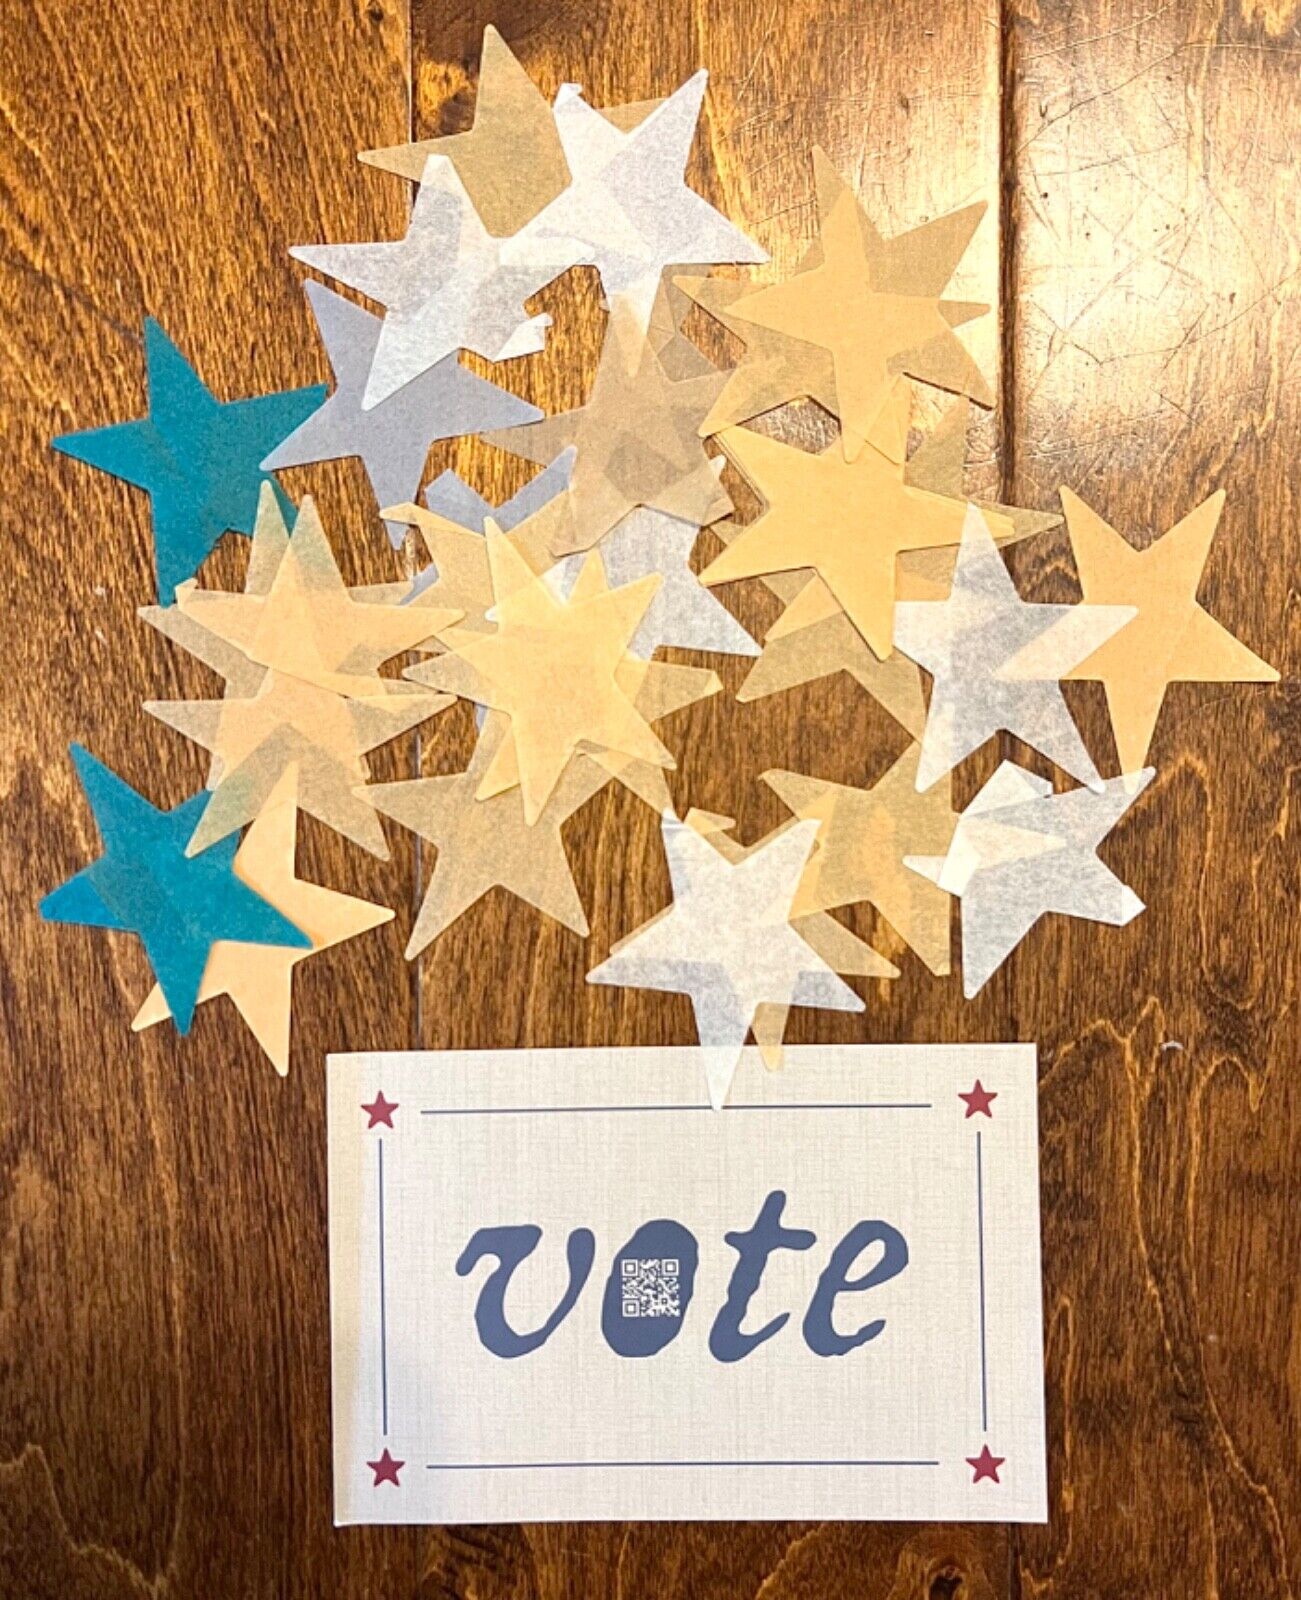 Taylor Swift VOTE Card & Paper Stars - Official Items